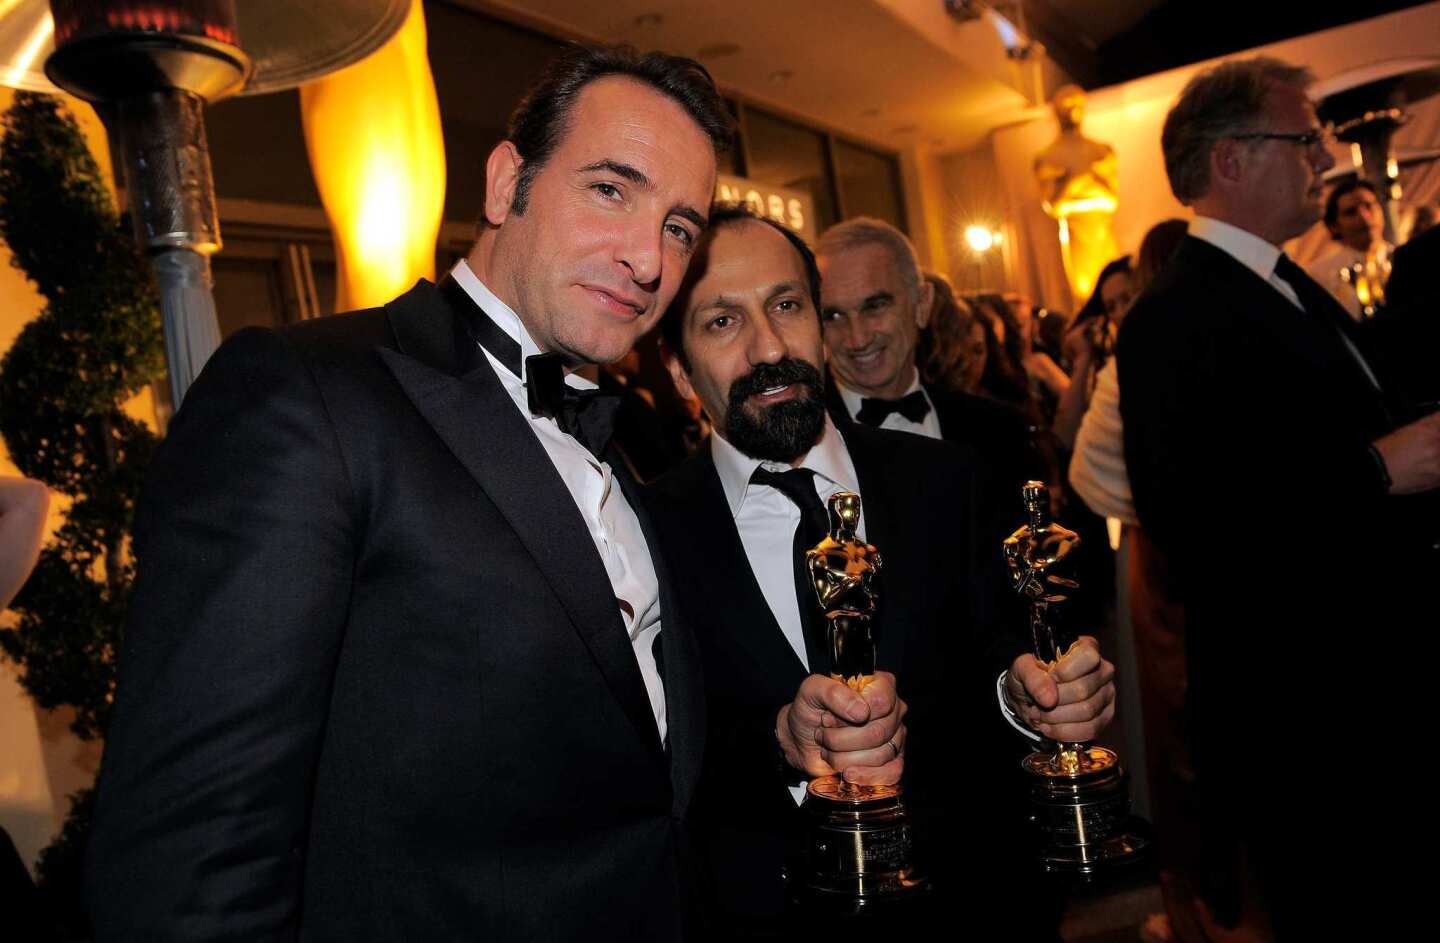 Farhadi, winner for foreign-language film for "A Separation," with the man of the night, lead actor winner Dujardin.